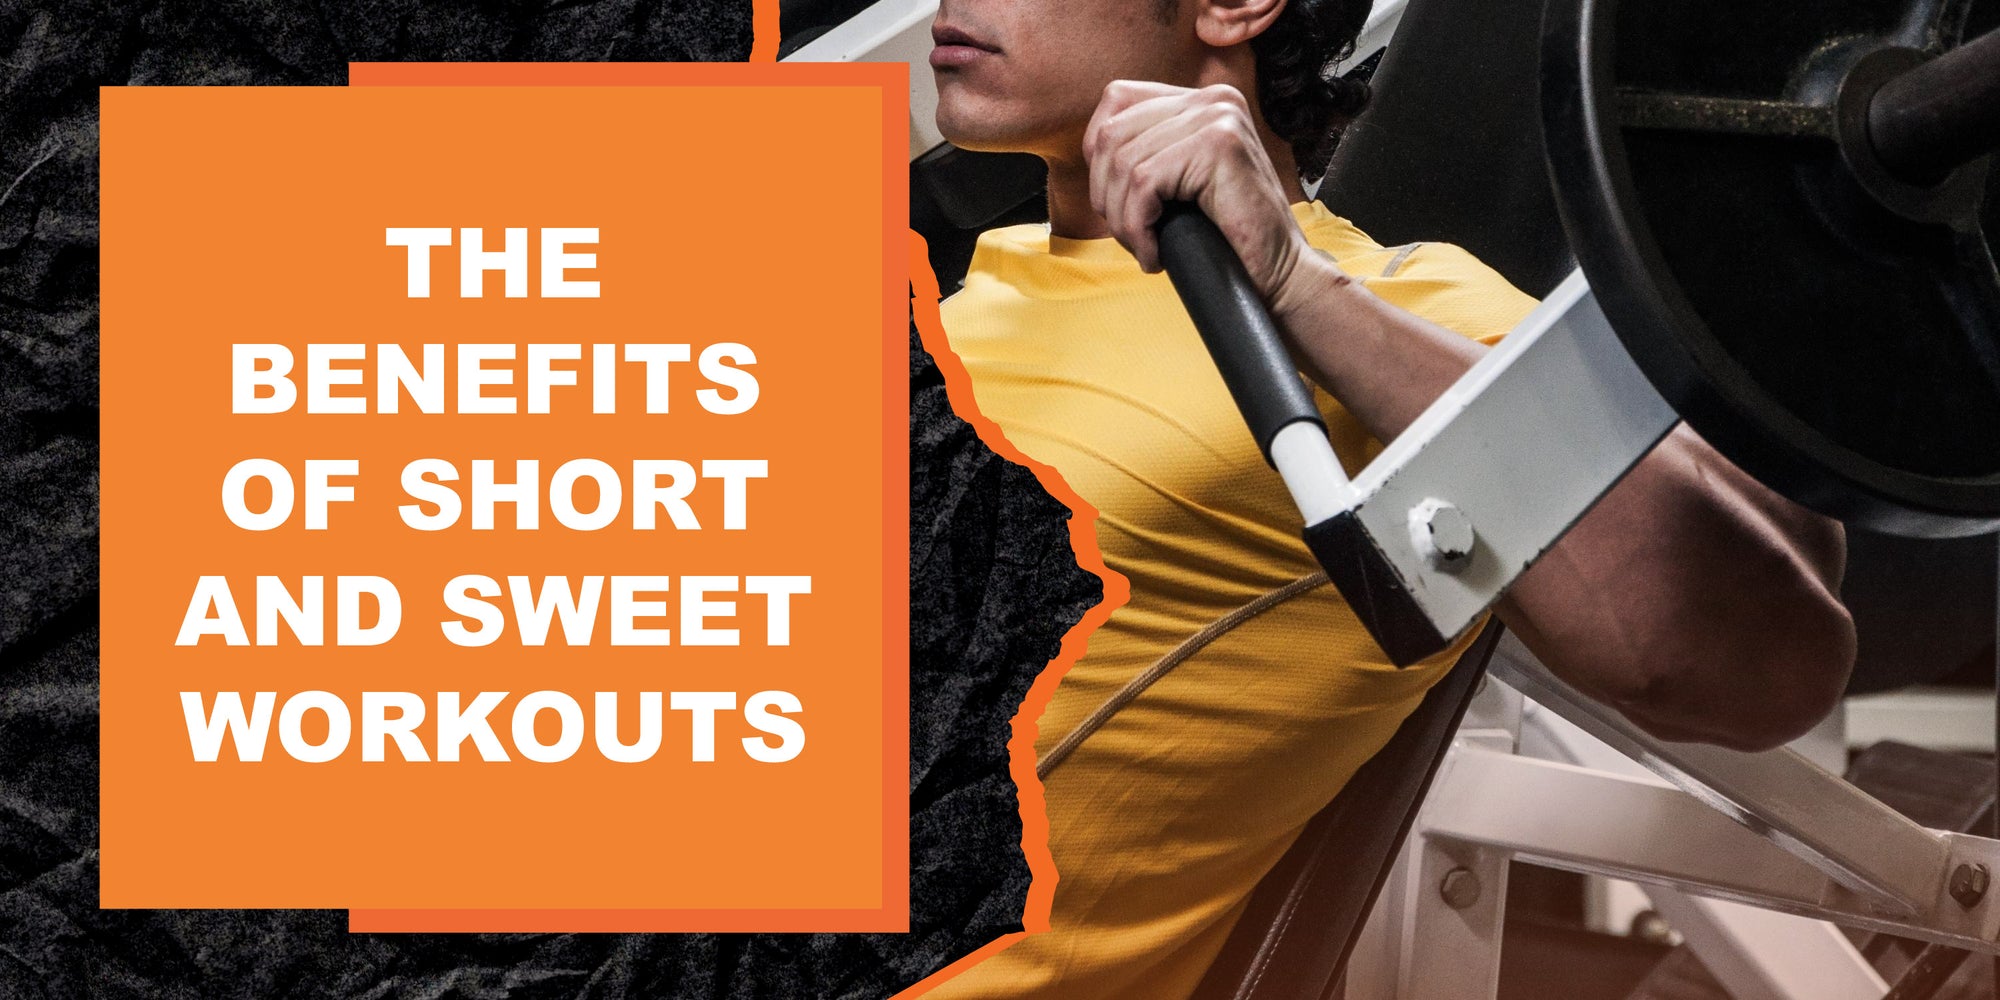 The Benefits of Short and Sweet Workouts